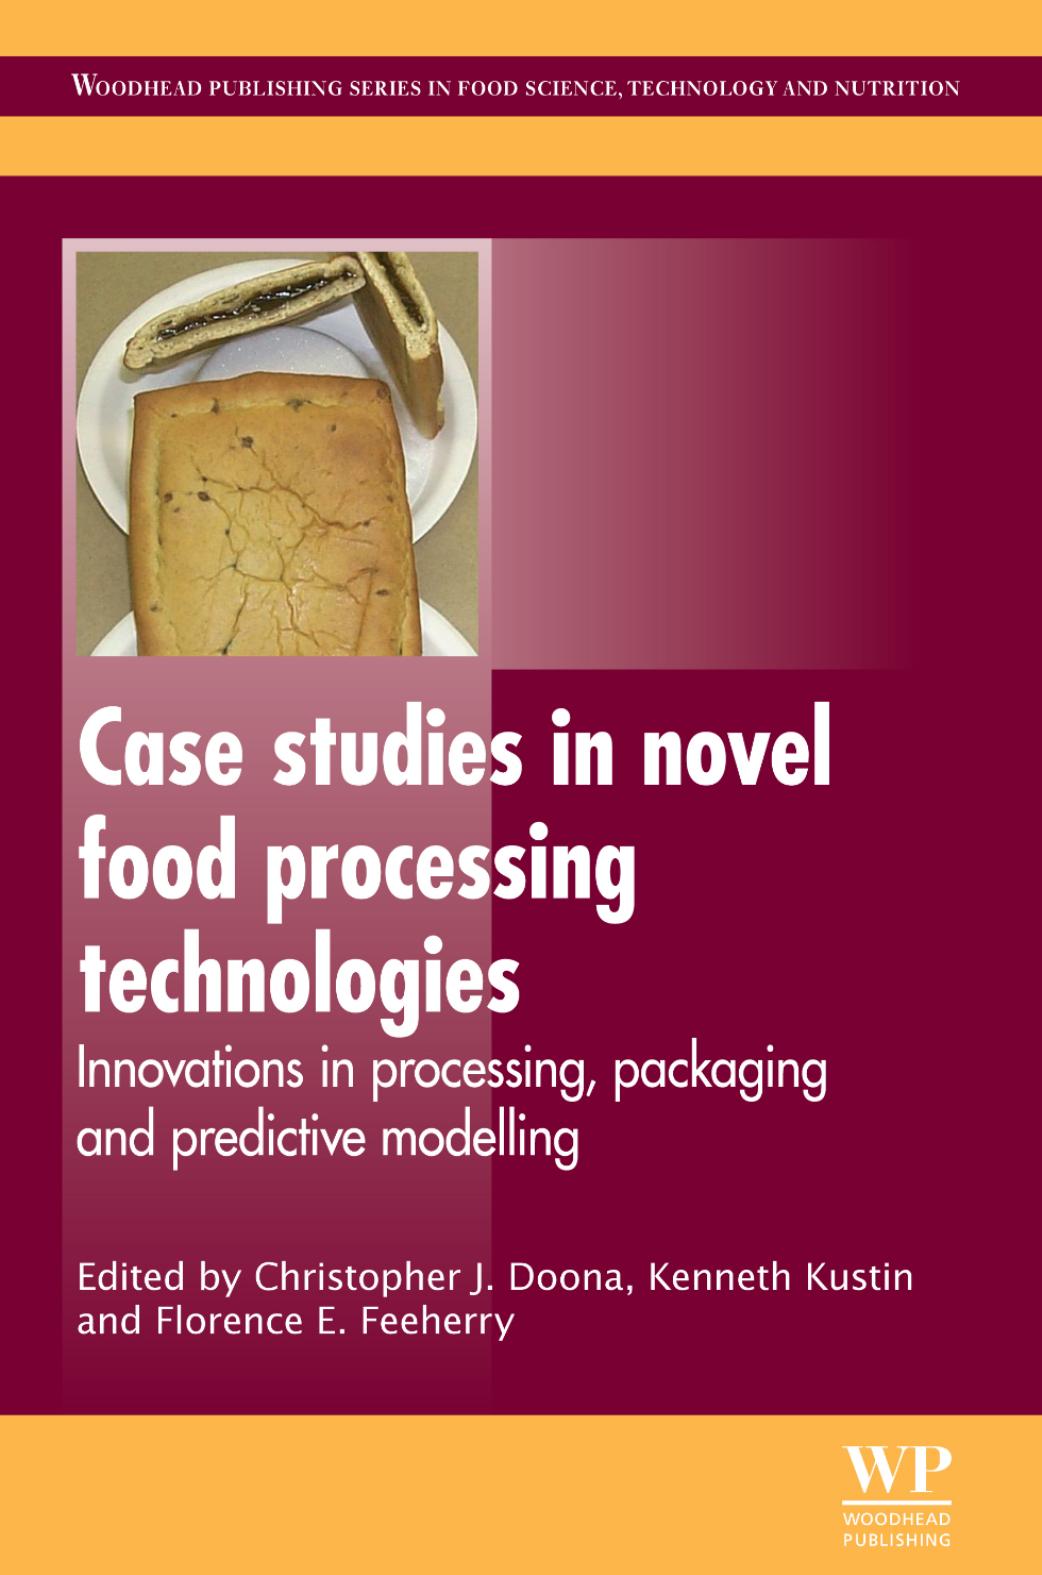 Case Studies in Novel Food Processing Technologies  Innovations in Processing, Packaging, and Predictive Modelling  2010